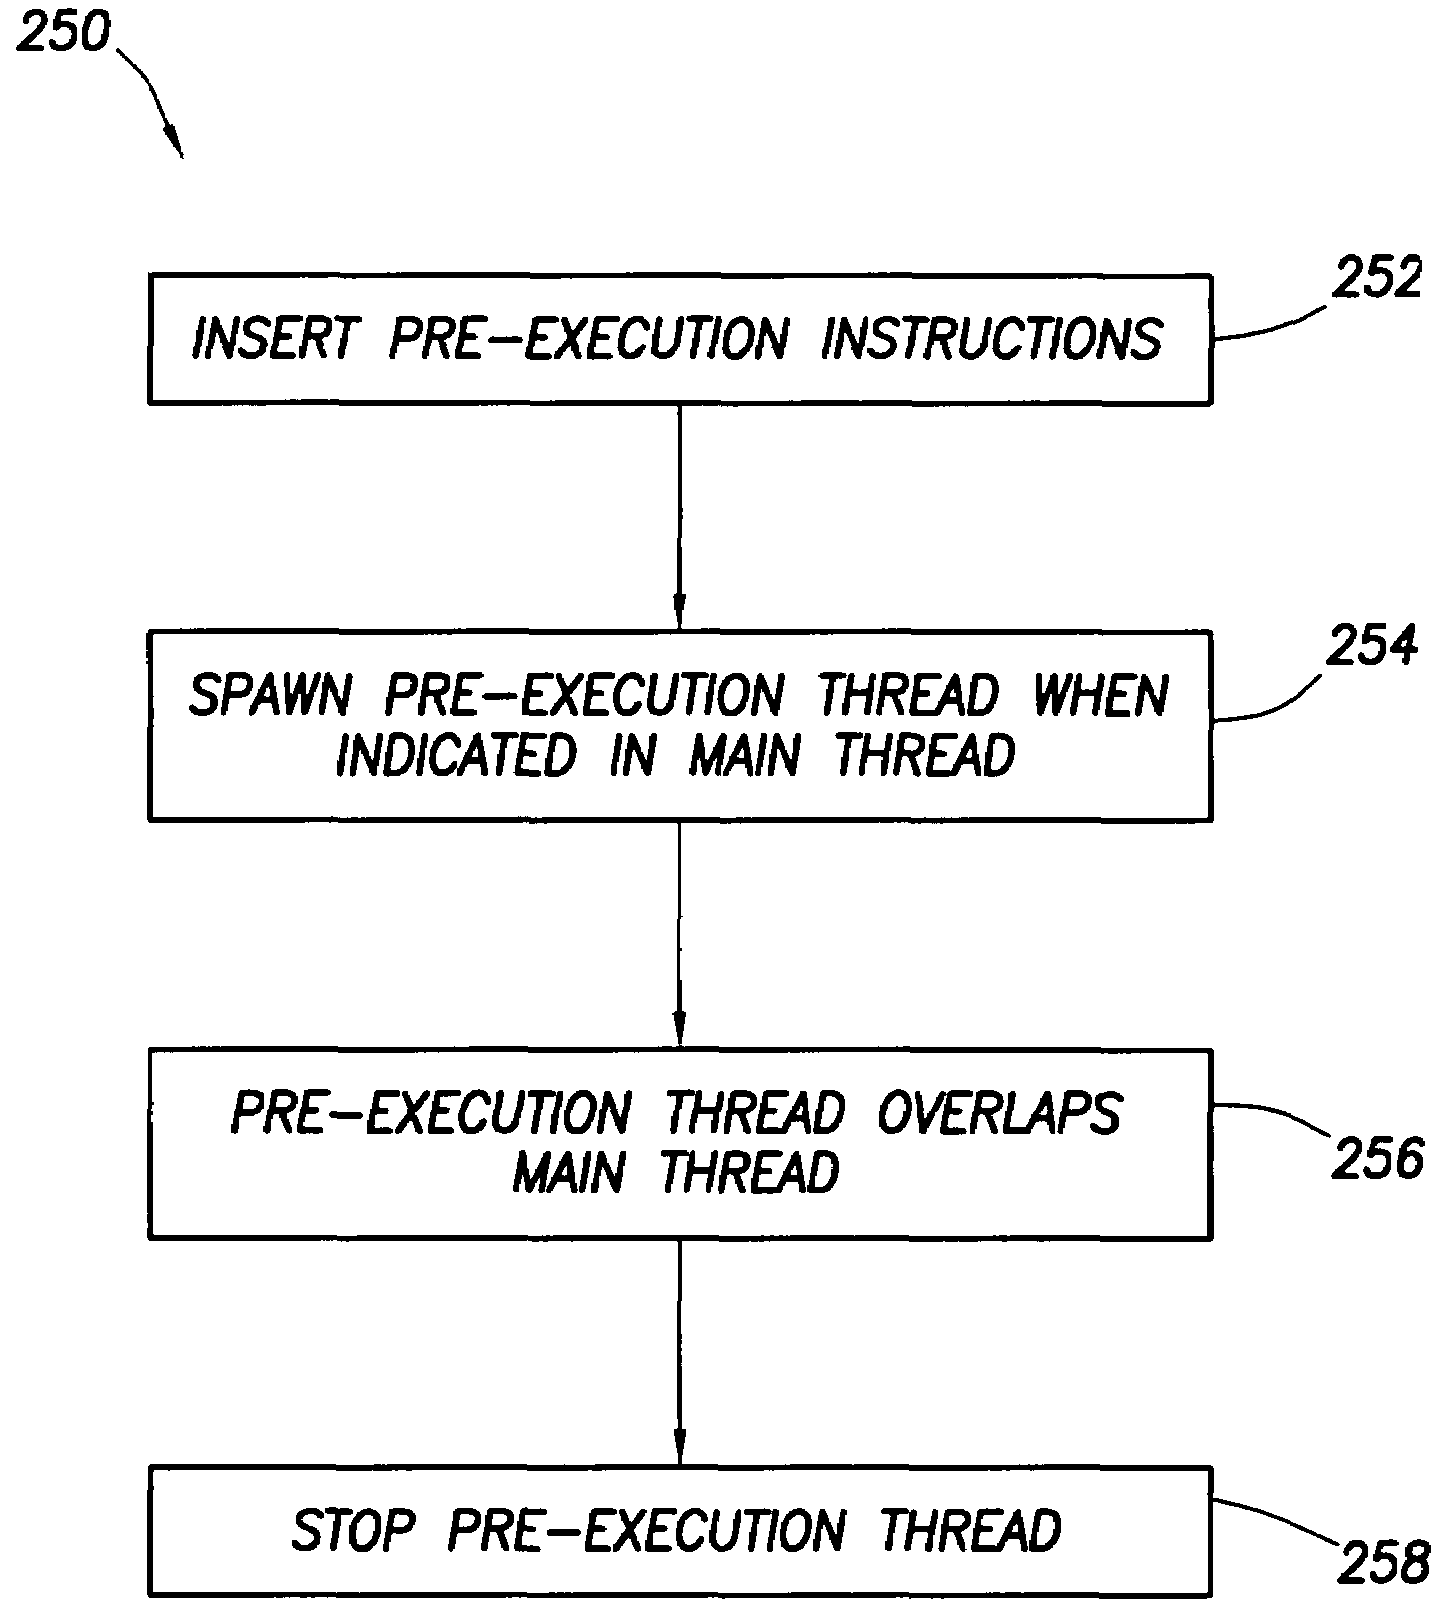 Software controlled pre-execution in a multithreaded processor